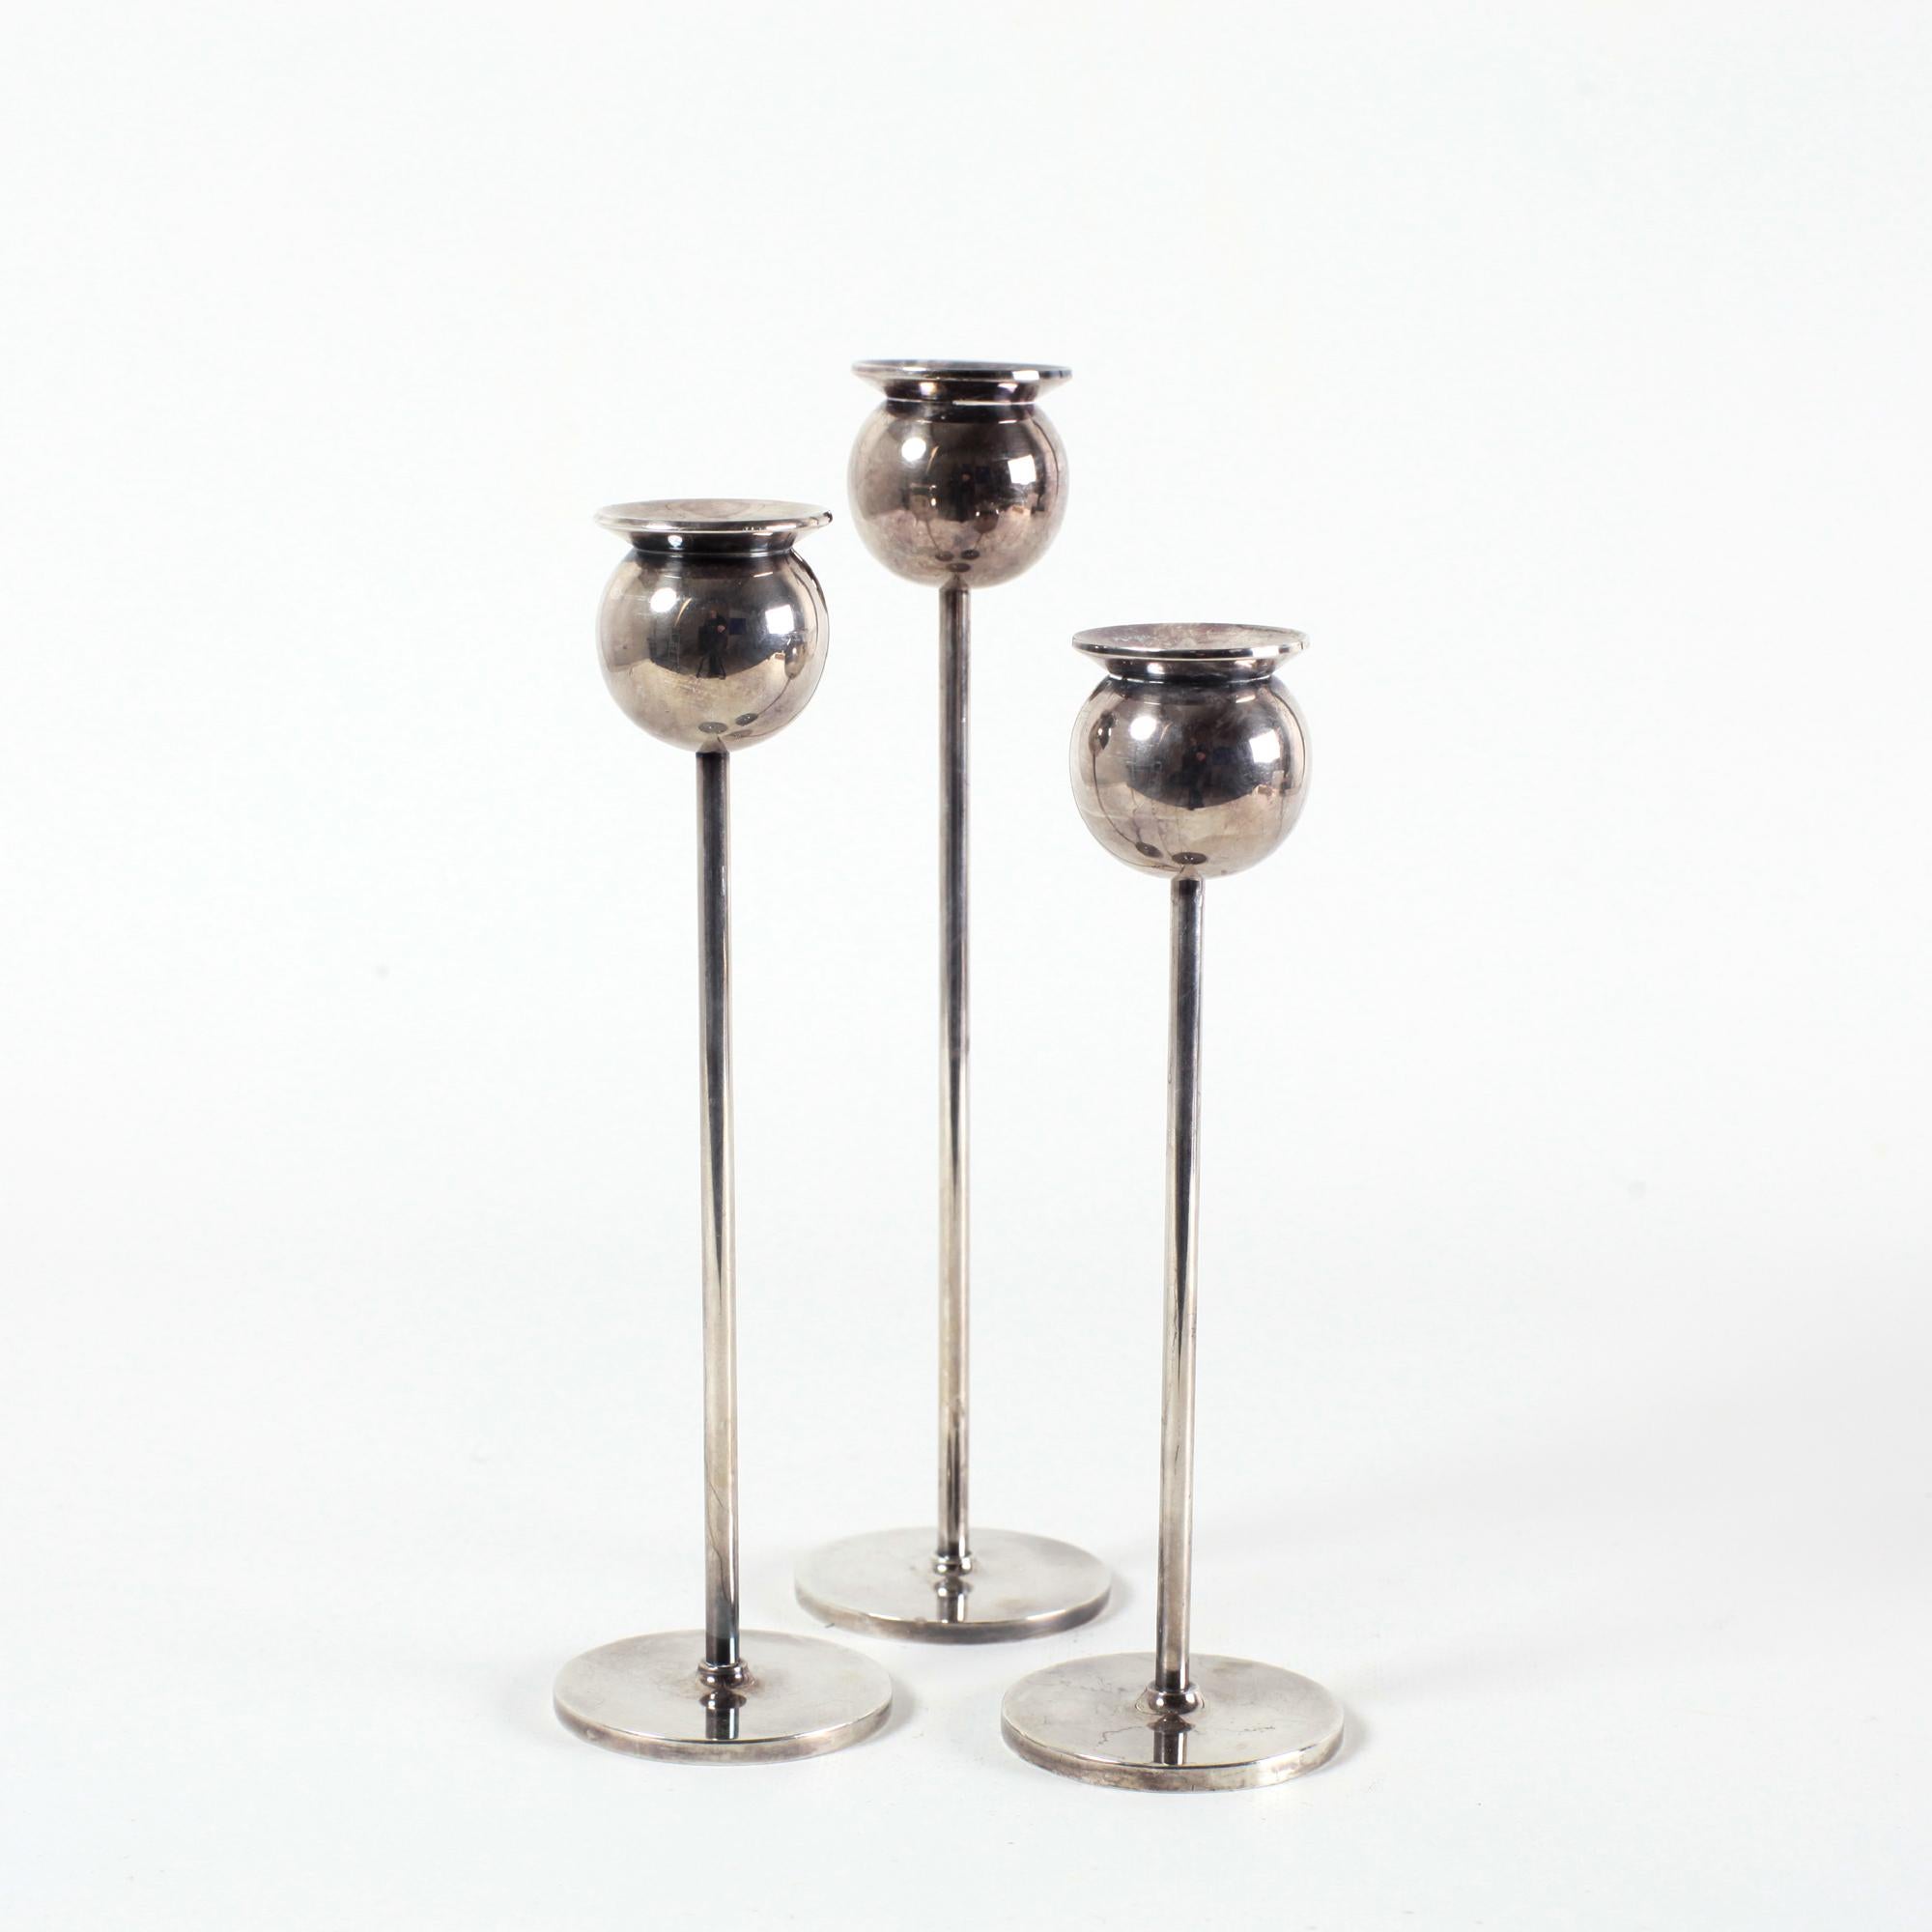 Set of  three rare nickel candlesticks model Tulip by Pierre Forssell for Skultuna Sweden 70s.
Skultuna was founded by King Karl IX in 1607 and has been a Purveyor to the Royal Court of Sweden ever since.
The Silversmith Pierre Forssell is one of